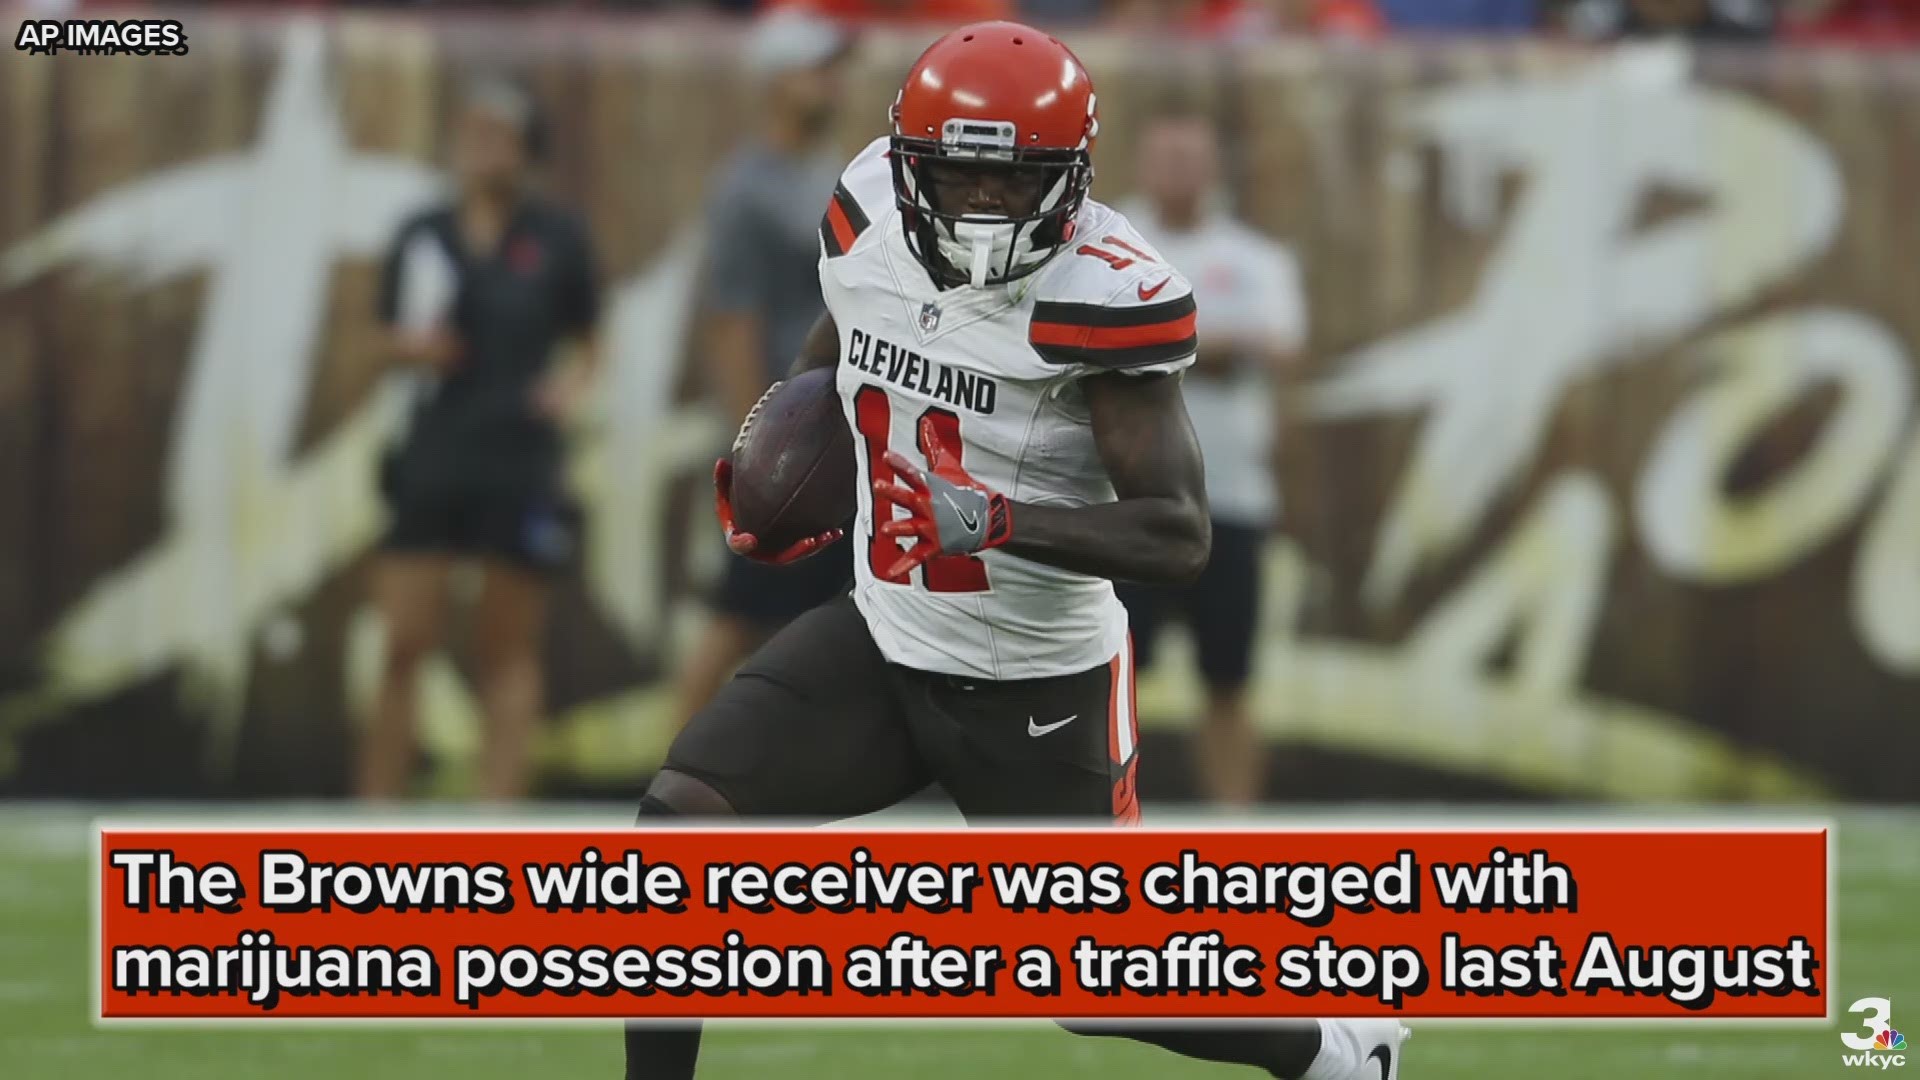 Cleveland Browns wide receiver Antonio Callaway was charged with marijuana possession after a traffic stop last August.